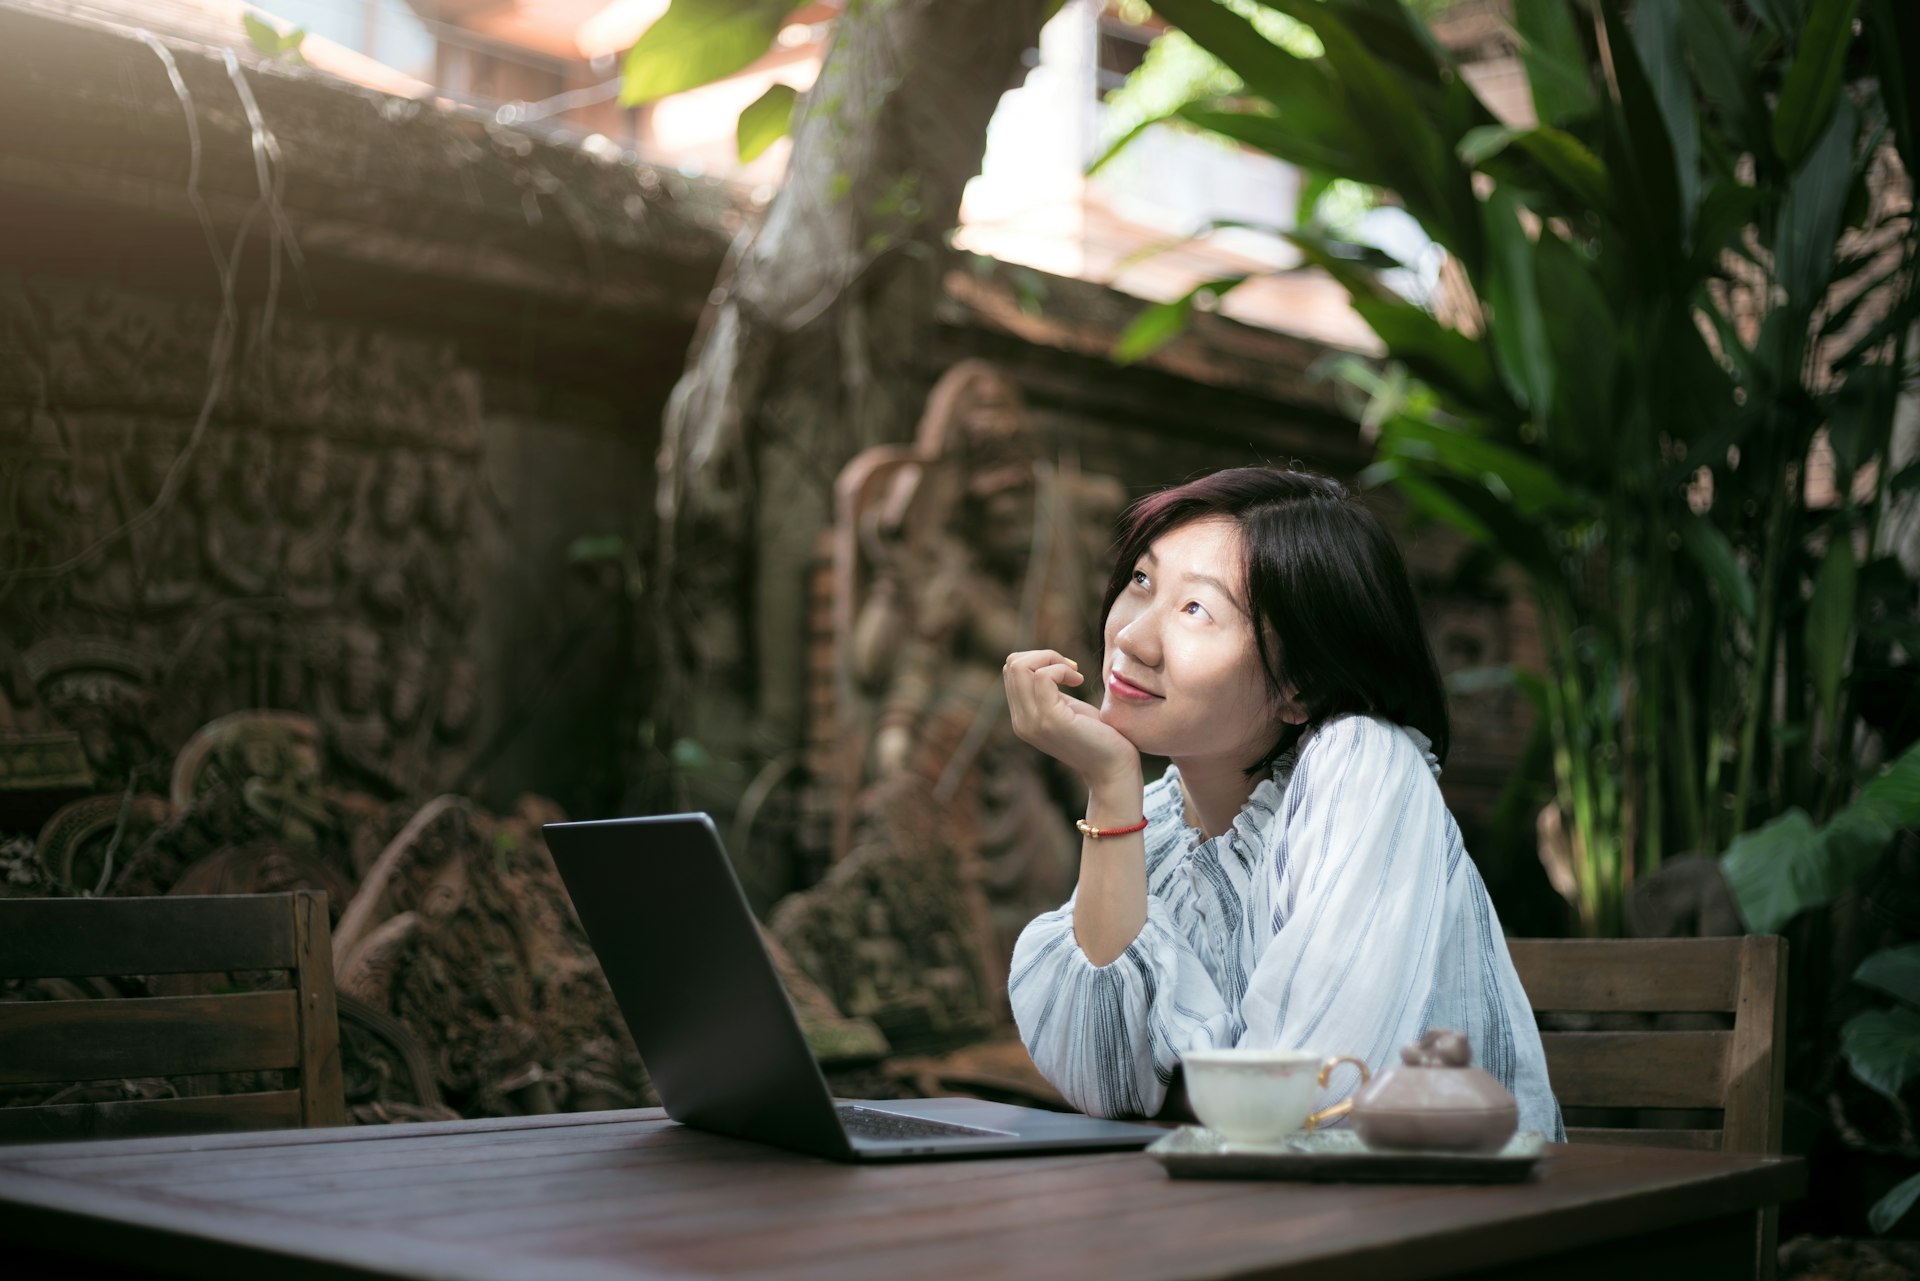 woman with laptop daydreaming.jpg